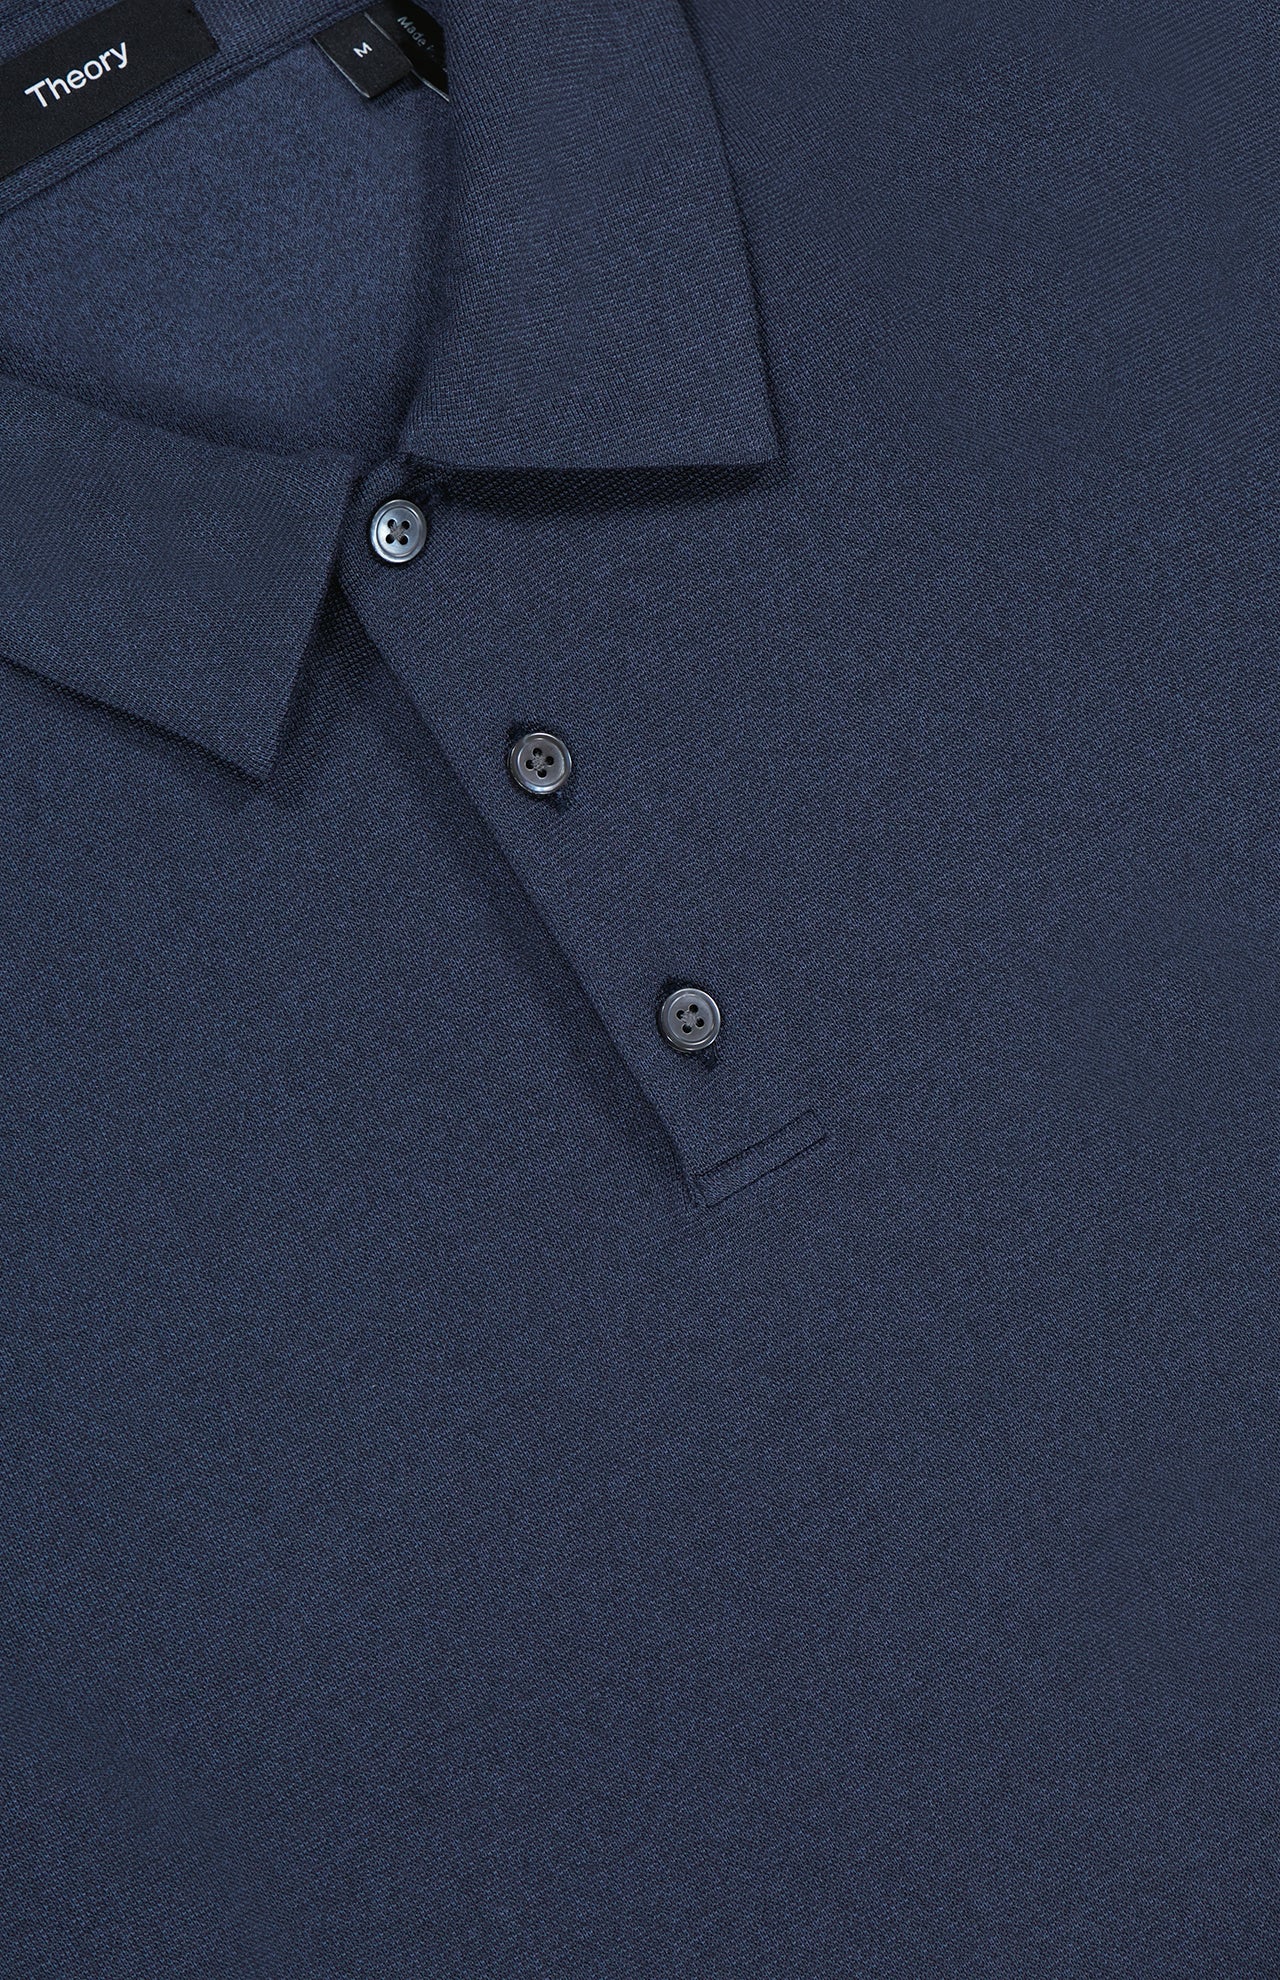 Bron Polo Shirt in Eclipse (7421965140083)